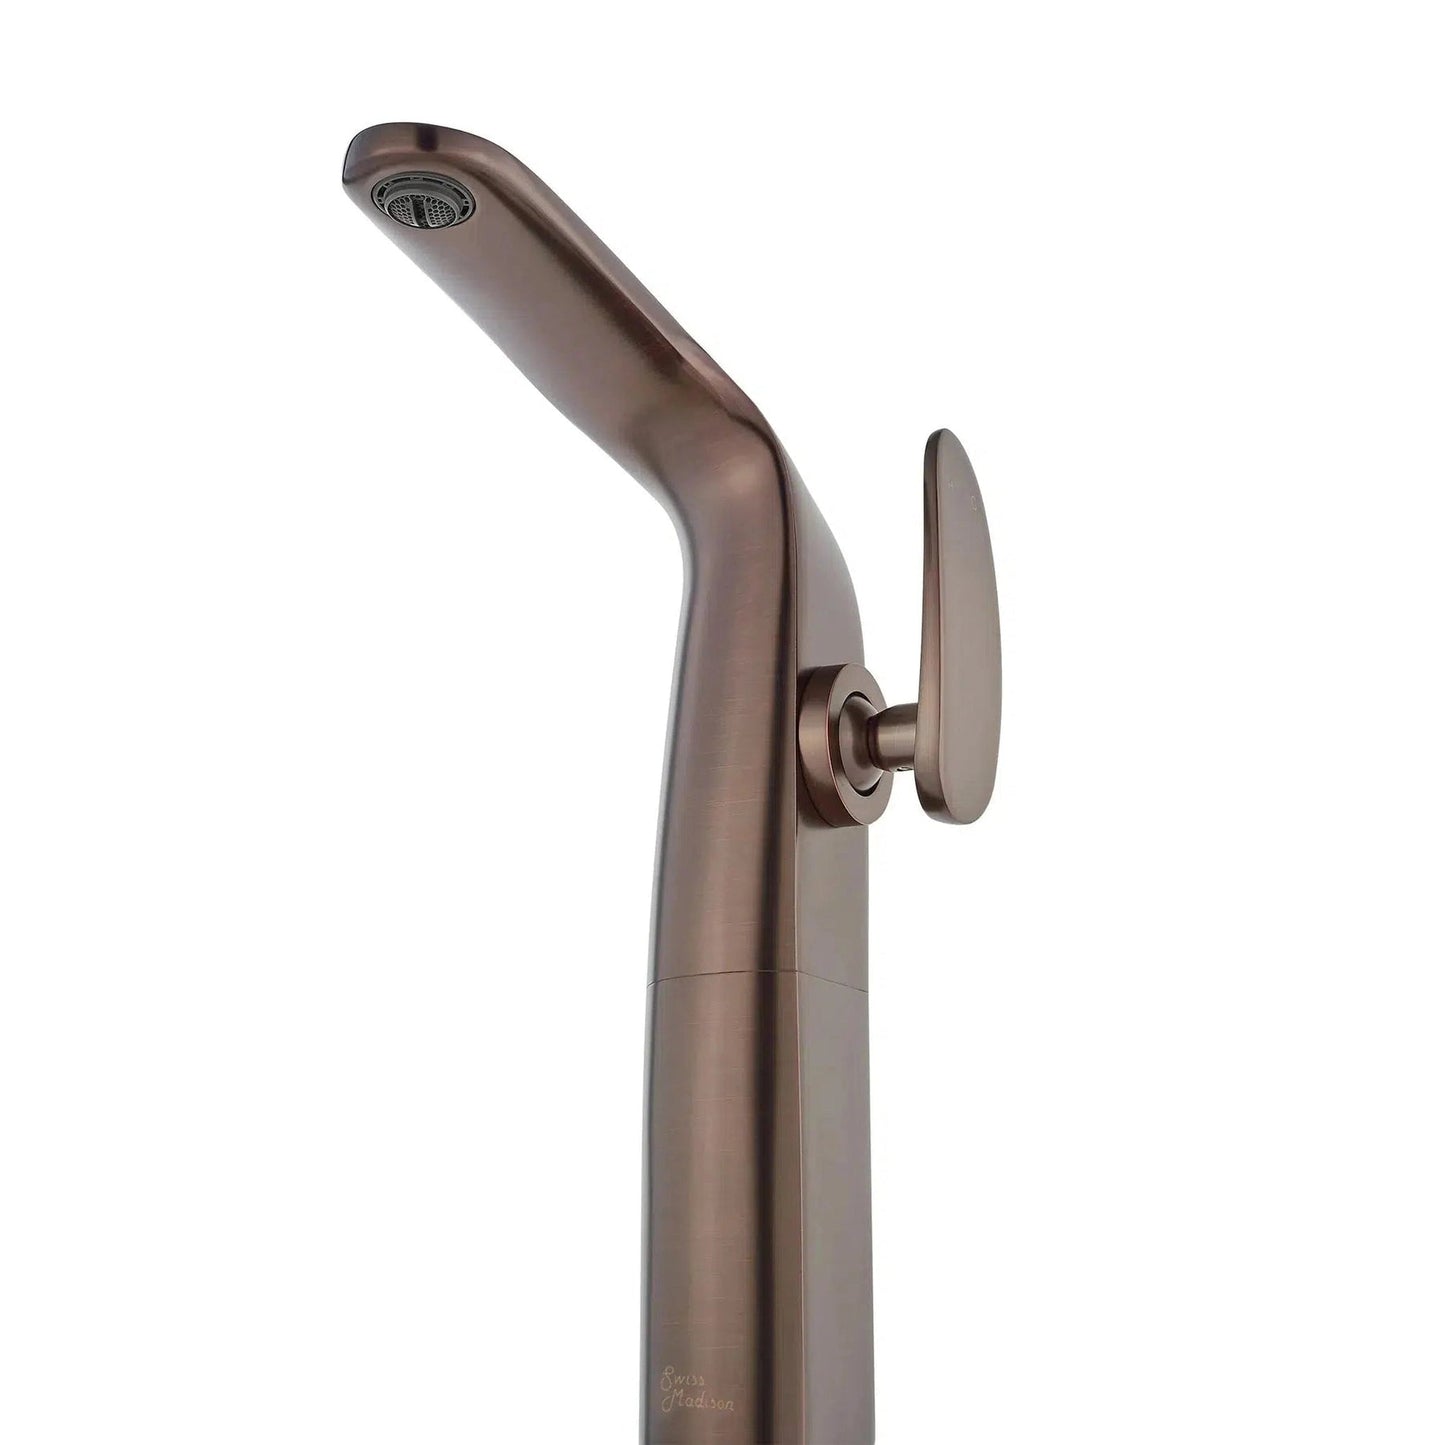 Swiss Madison Château 12" Oil Rubbed Bronze Single Hole Bathroom Faucet With Flow Rate of 1.2 GPM